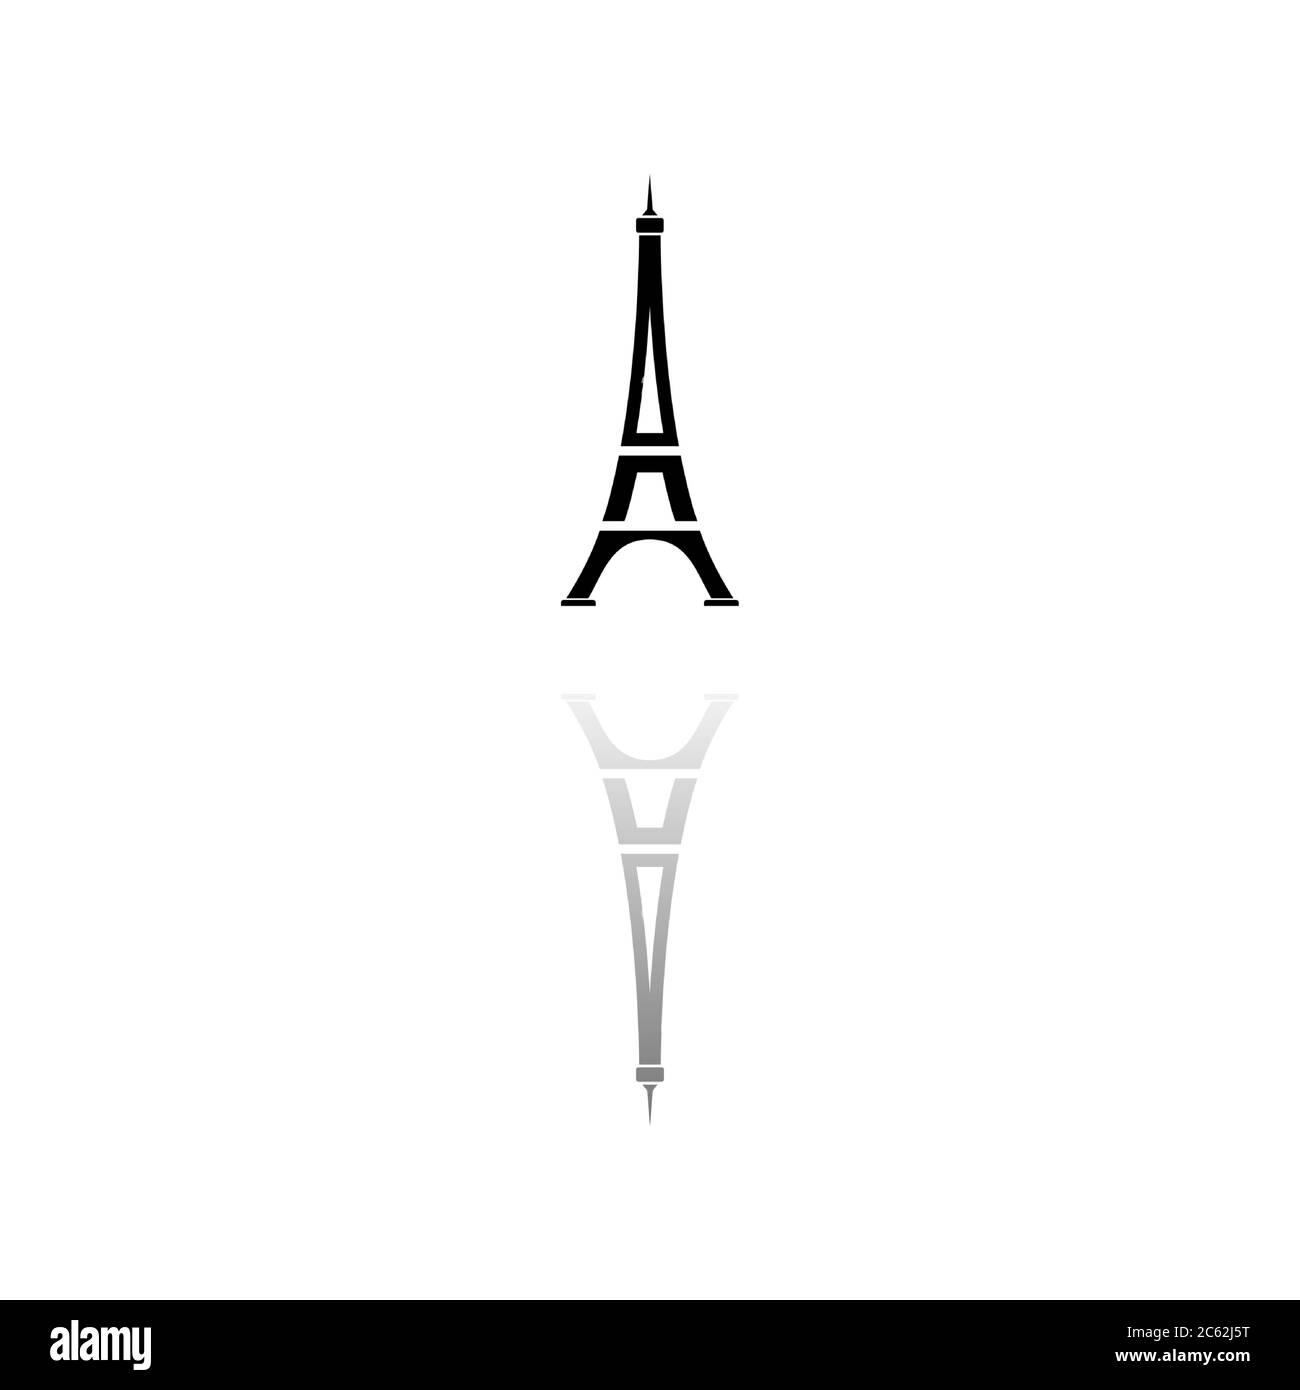 Eiffel tower. Black symbol on white background. Simple illustration. Flat Vector Icon. Mirror Reflection Shadow. Can be used in logo, web, mobile and Stock Vector